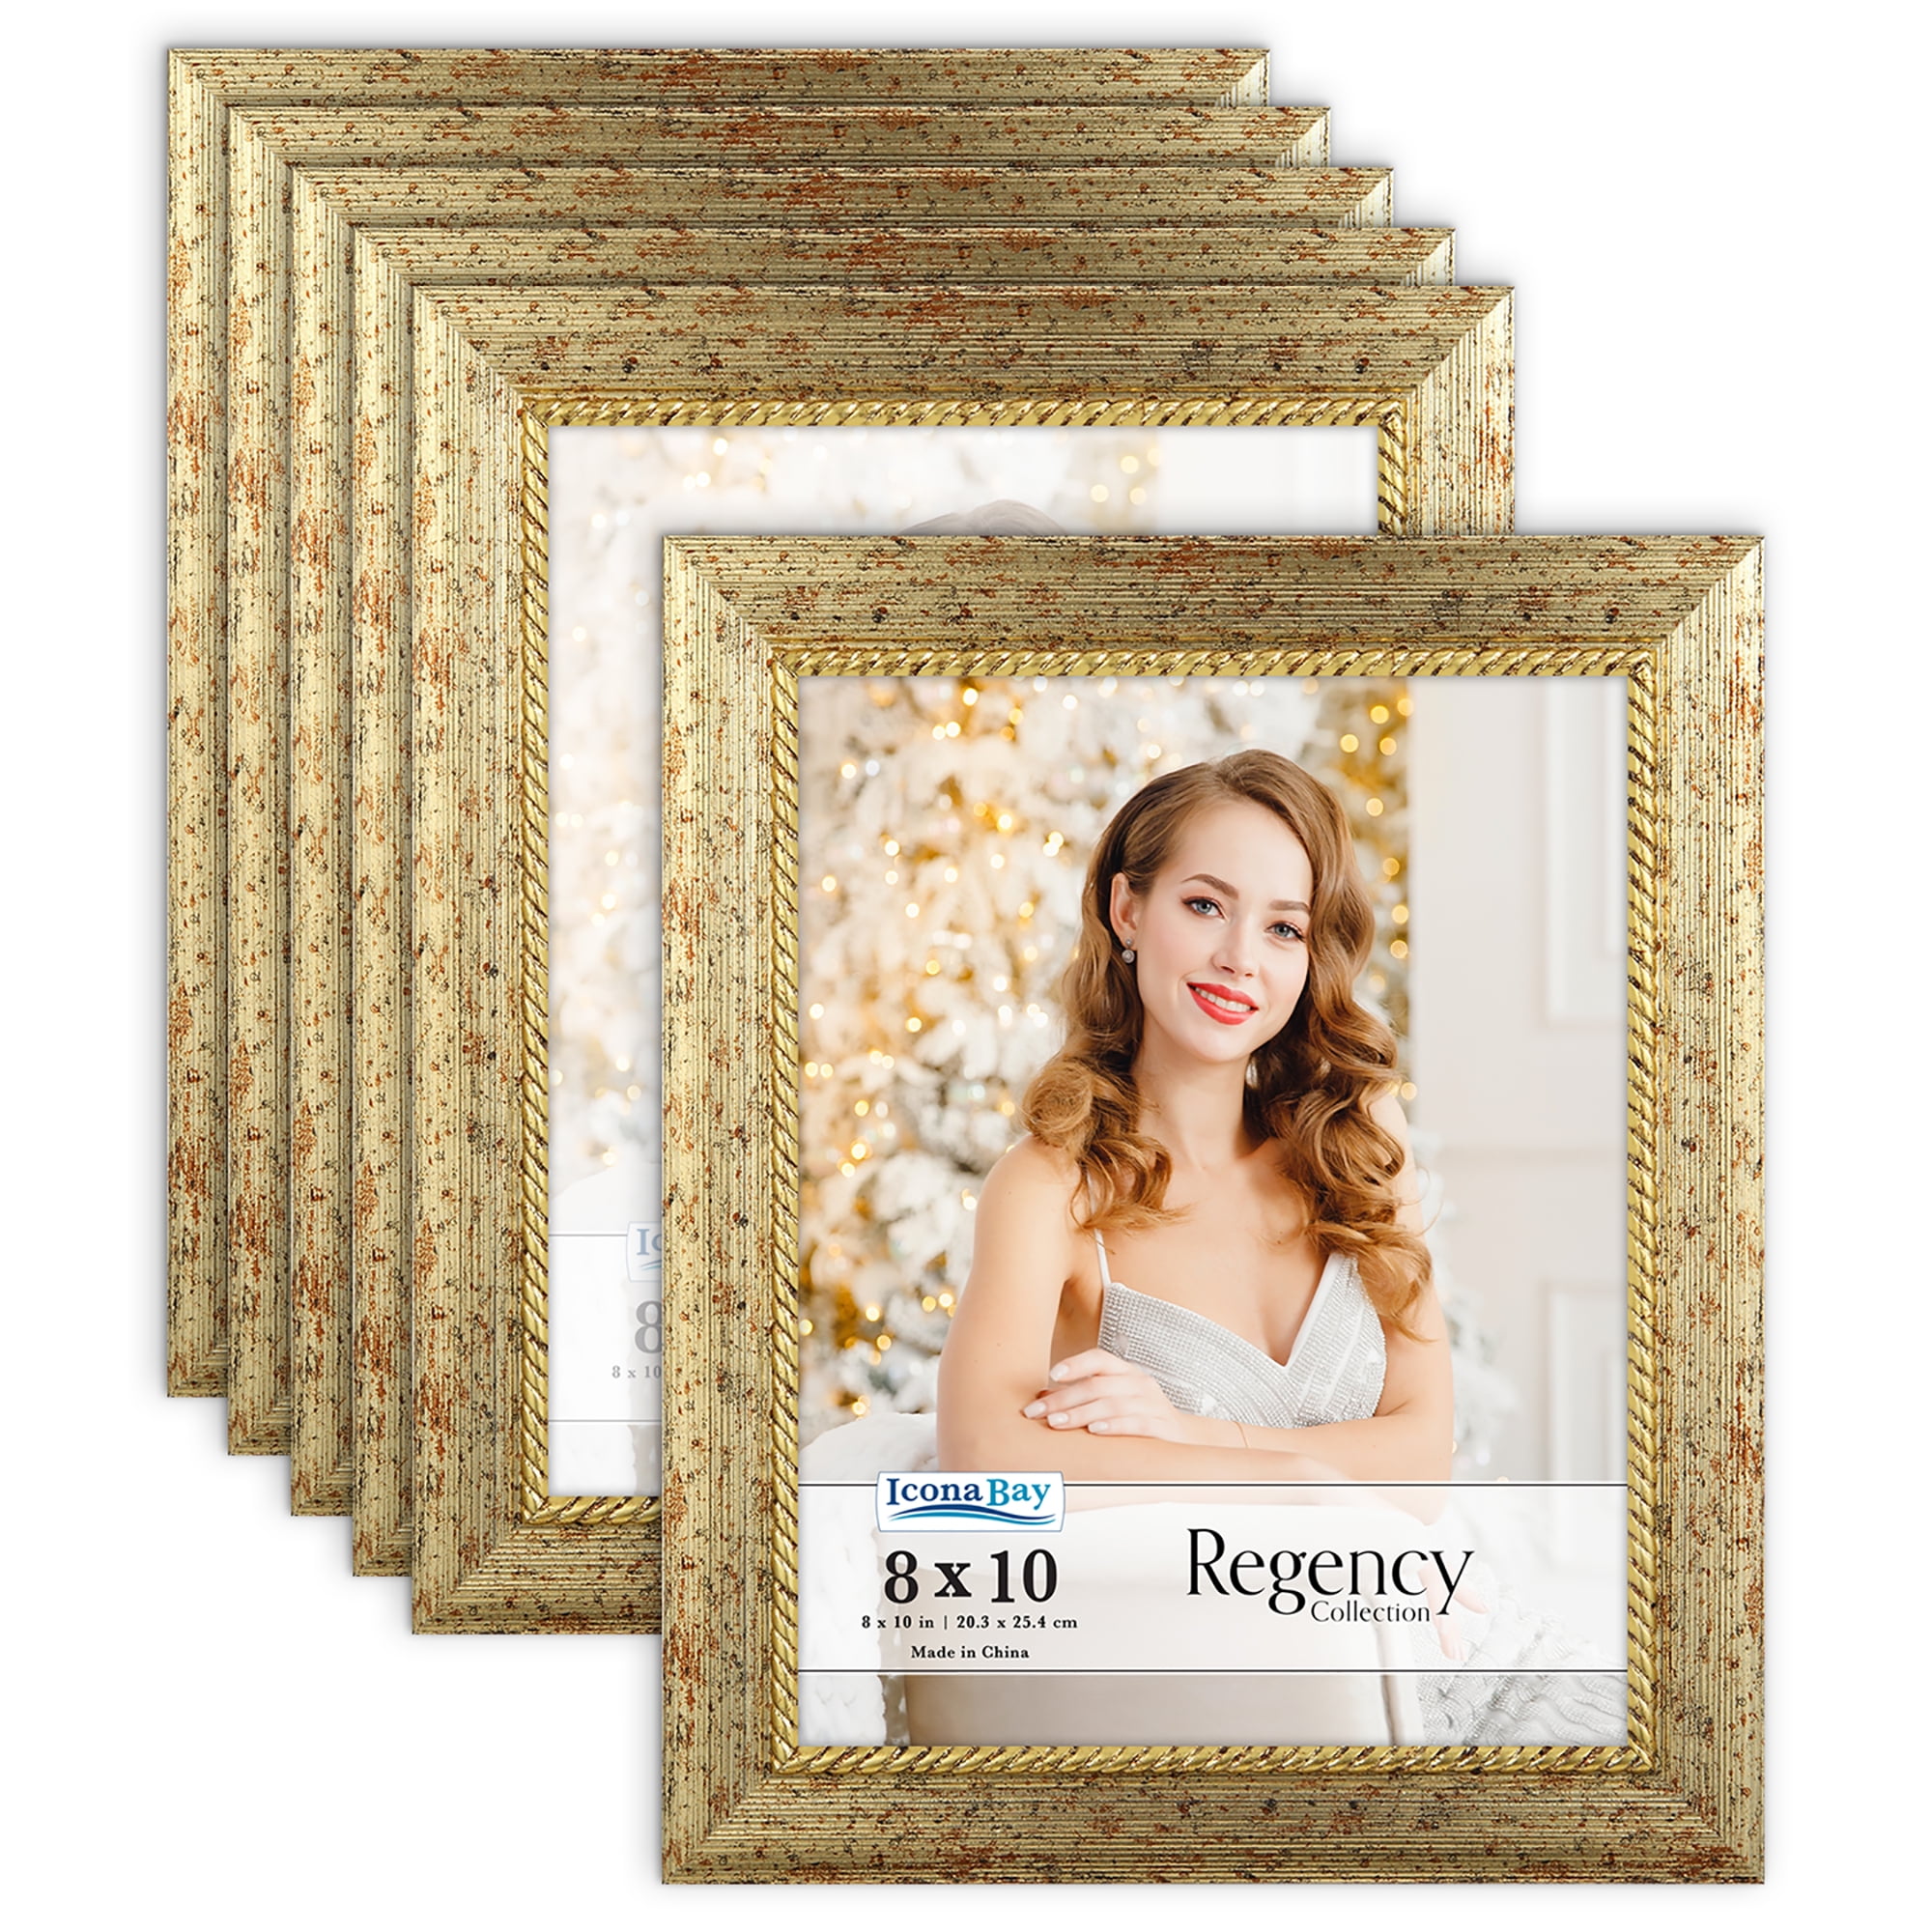 Icona Bay 8x10 Picture Frames (White, 6 Pack), Sturdy Wood Composite Photo  Frames 8 x 10, Sleek Design, Table Top or Wall Mount, Exclusives Collection